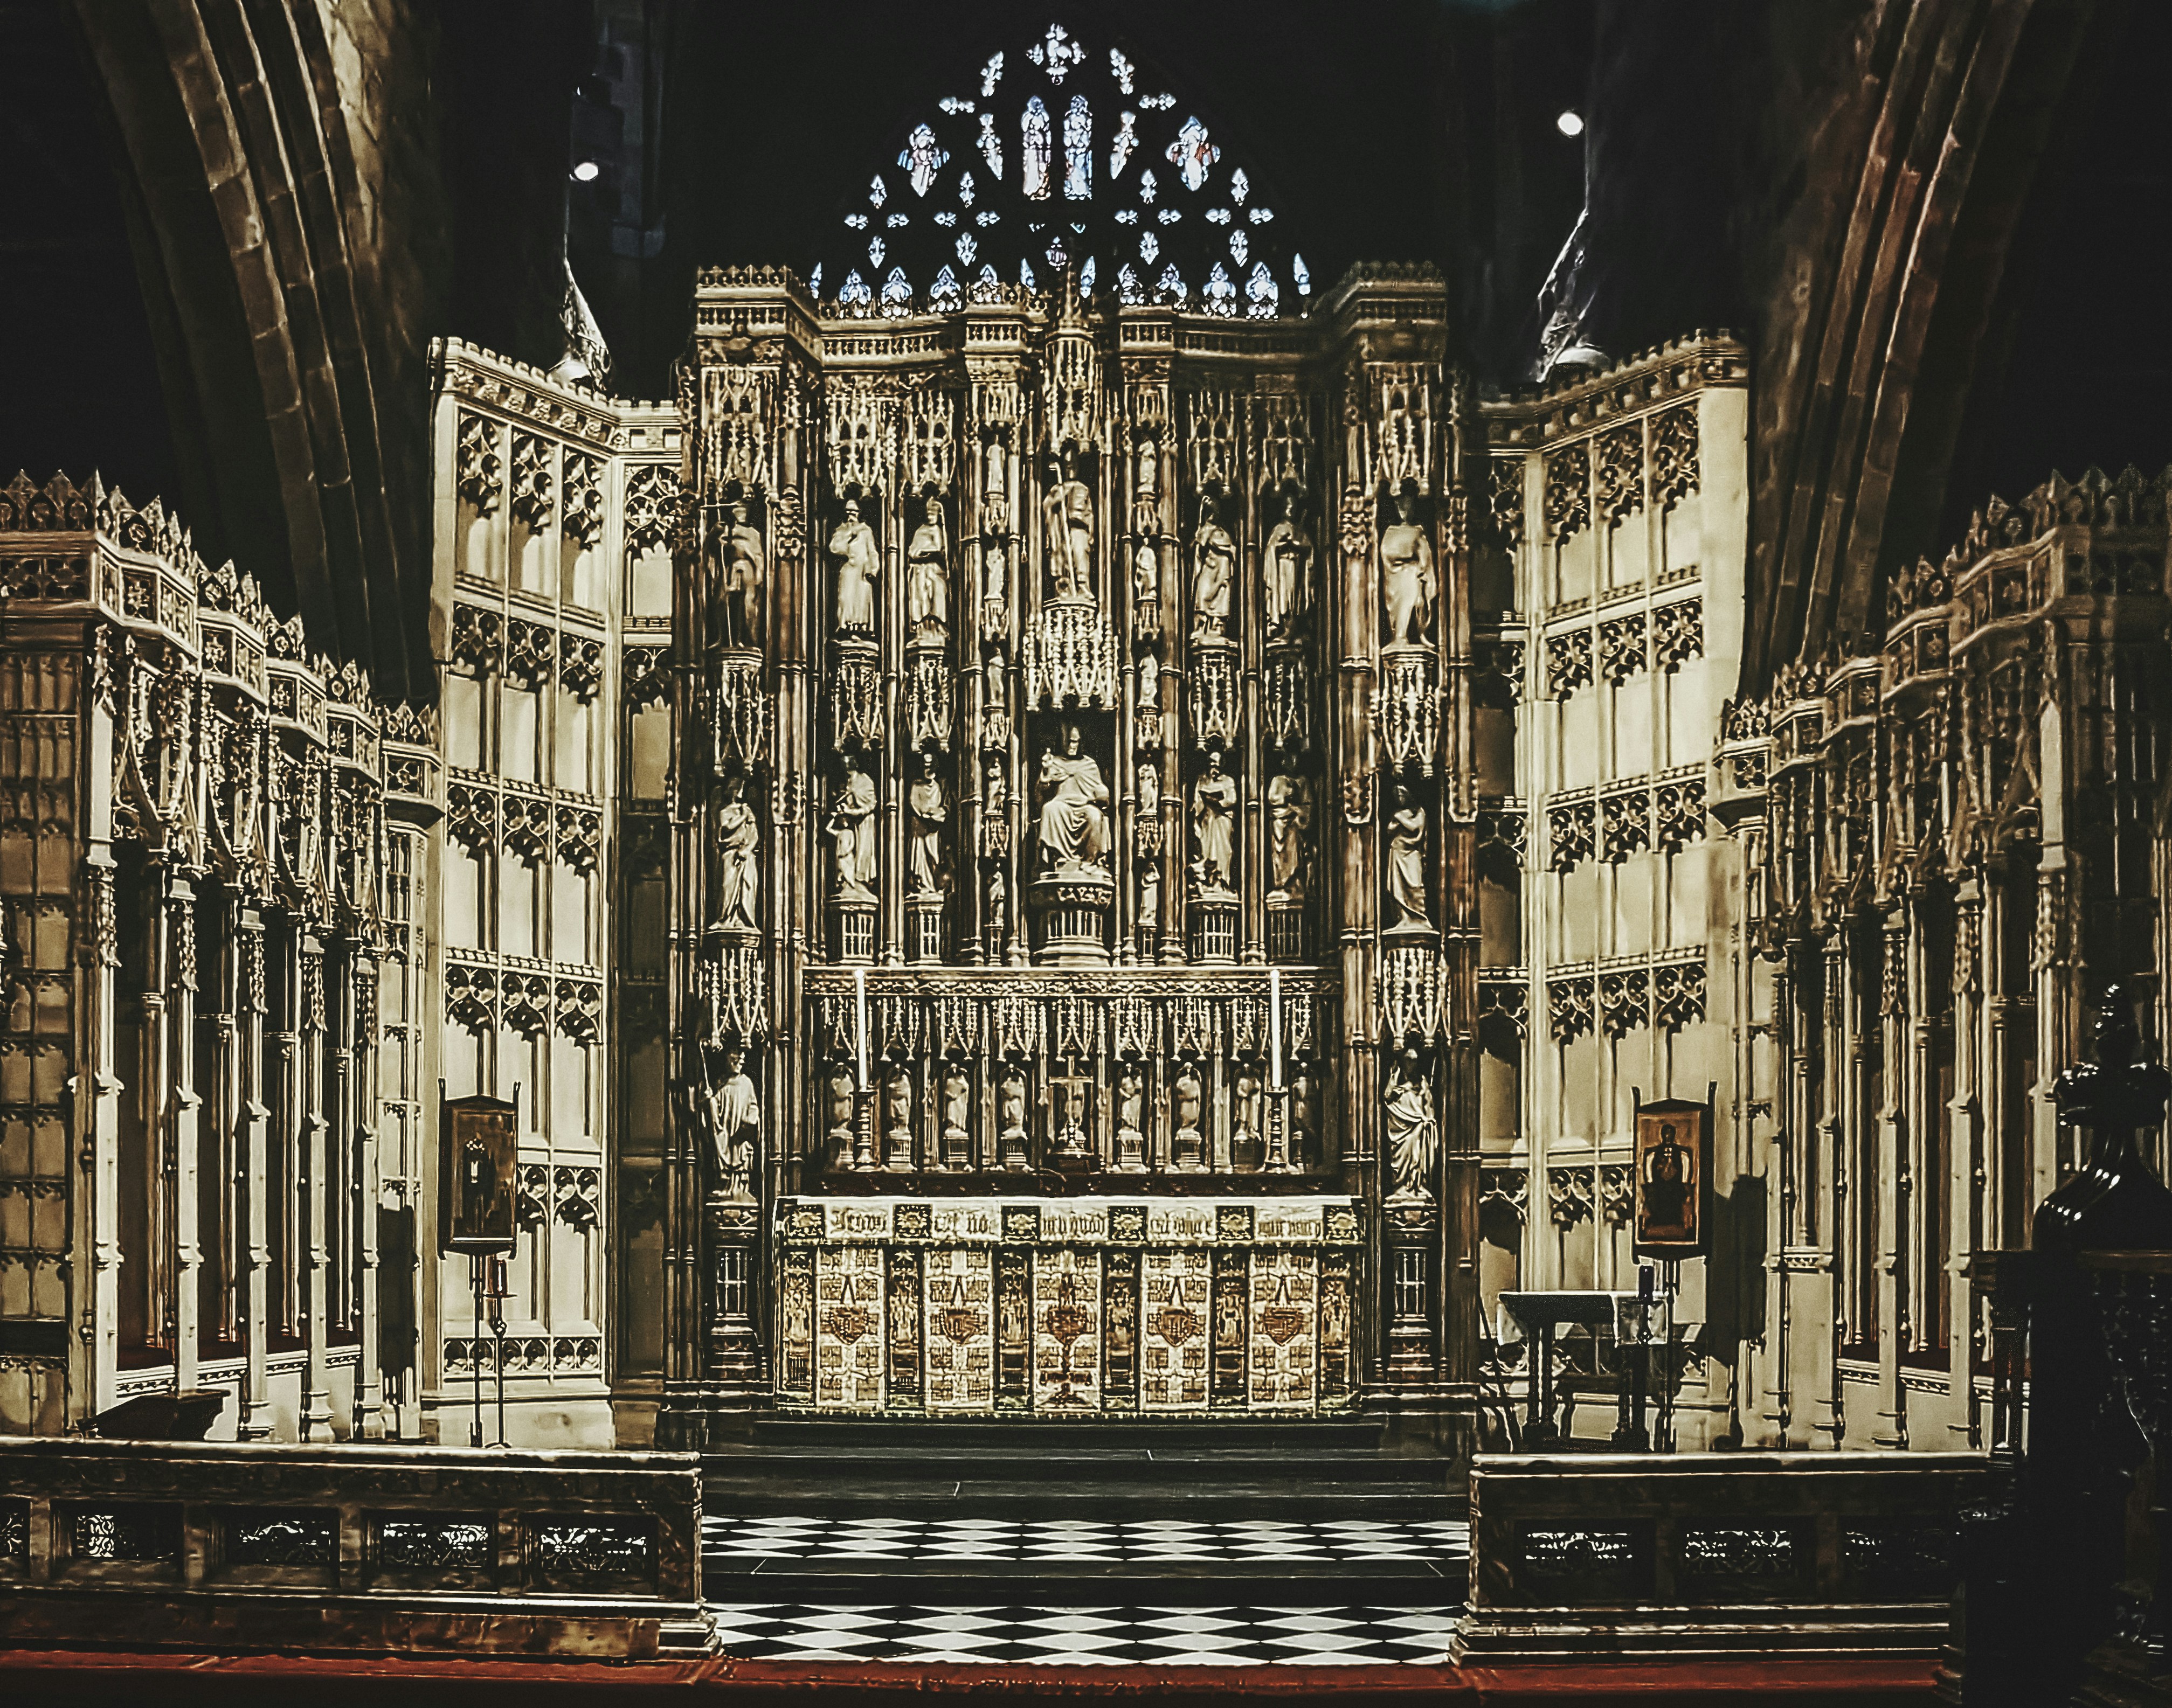 The altar at The Cathedral Church of St. Nicholas in Newcastle upon Tyne's city centre (Sep., 2021).